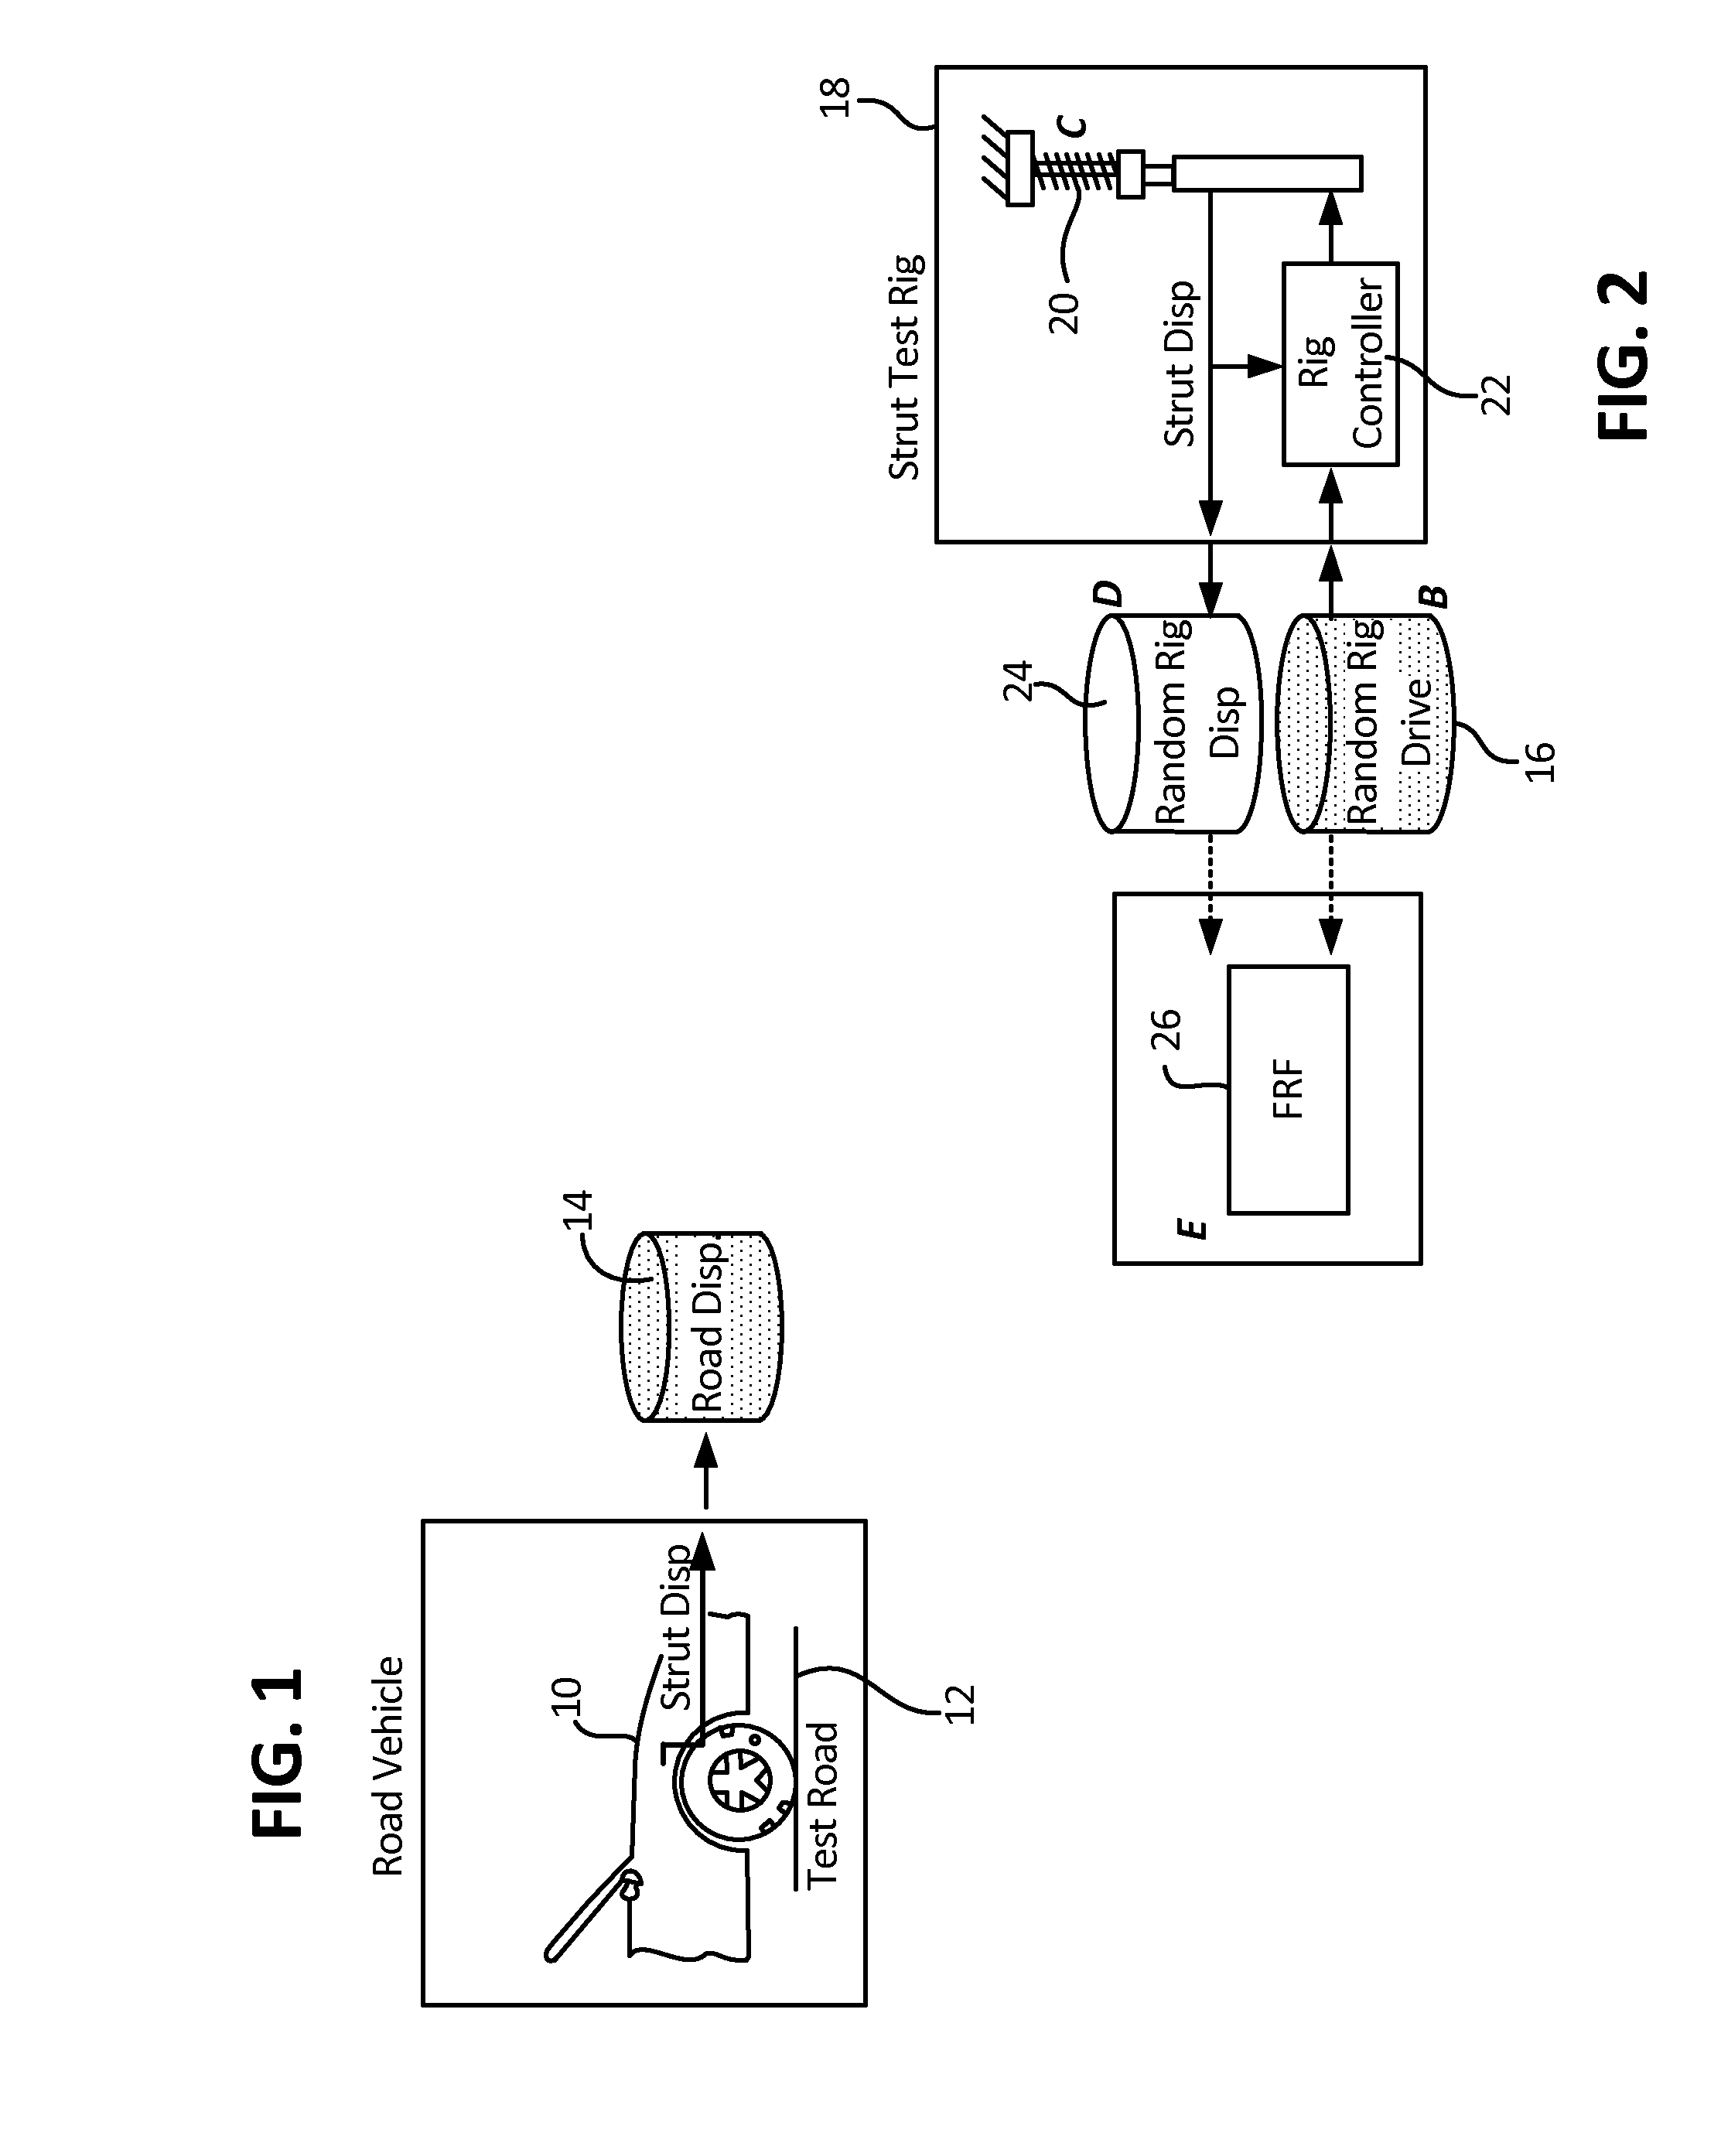 Method and systems for off-line control for simulation of coupled hybrid dynamic systems